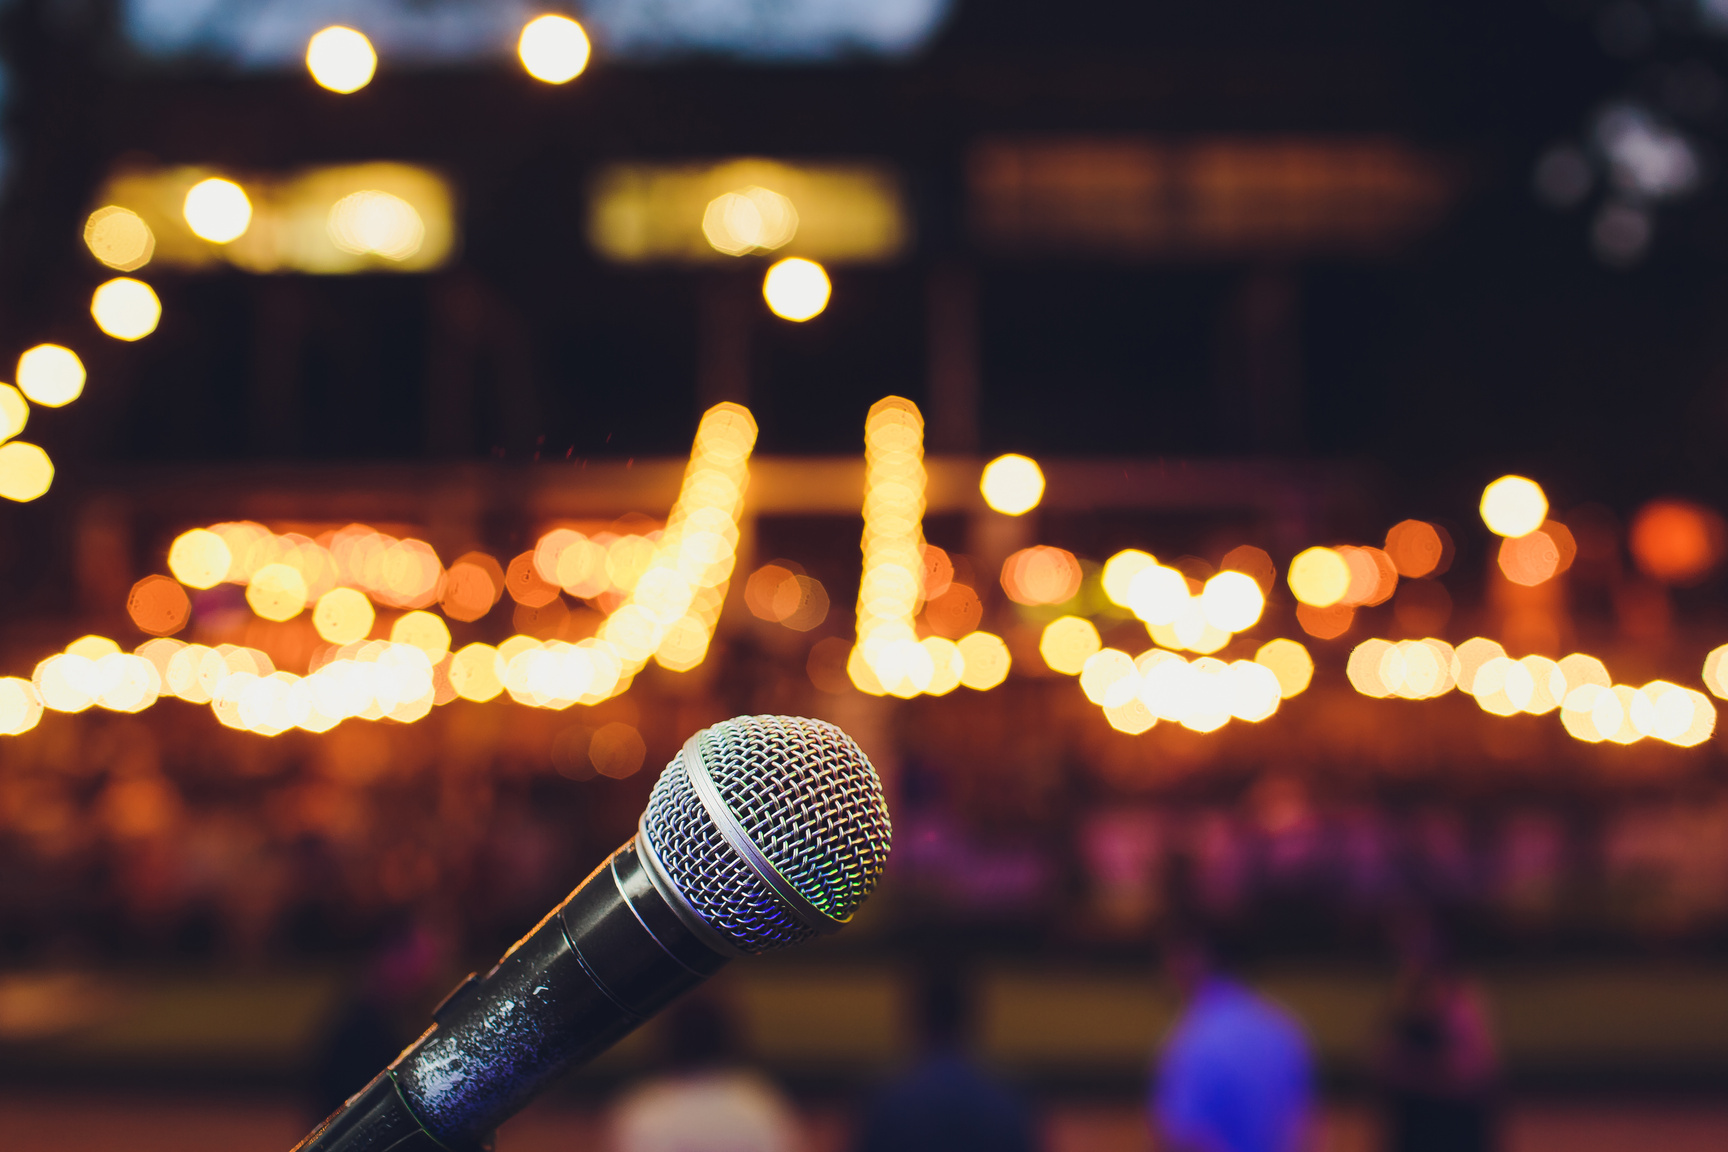 microphone on a stand up comedy stage with colorful bokeh , high contrast image.